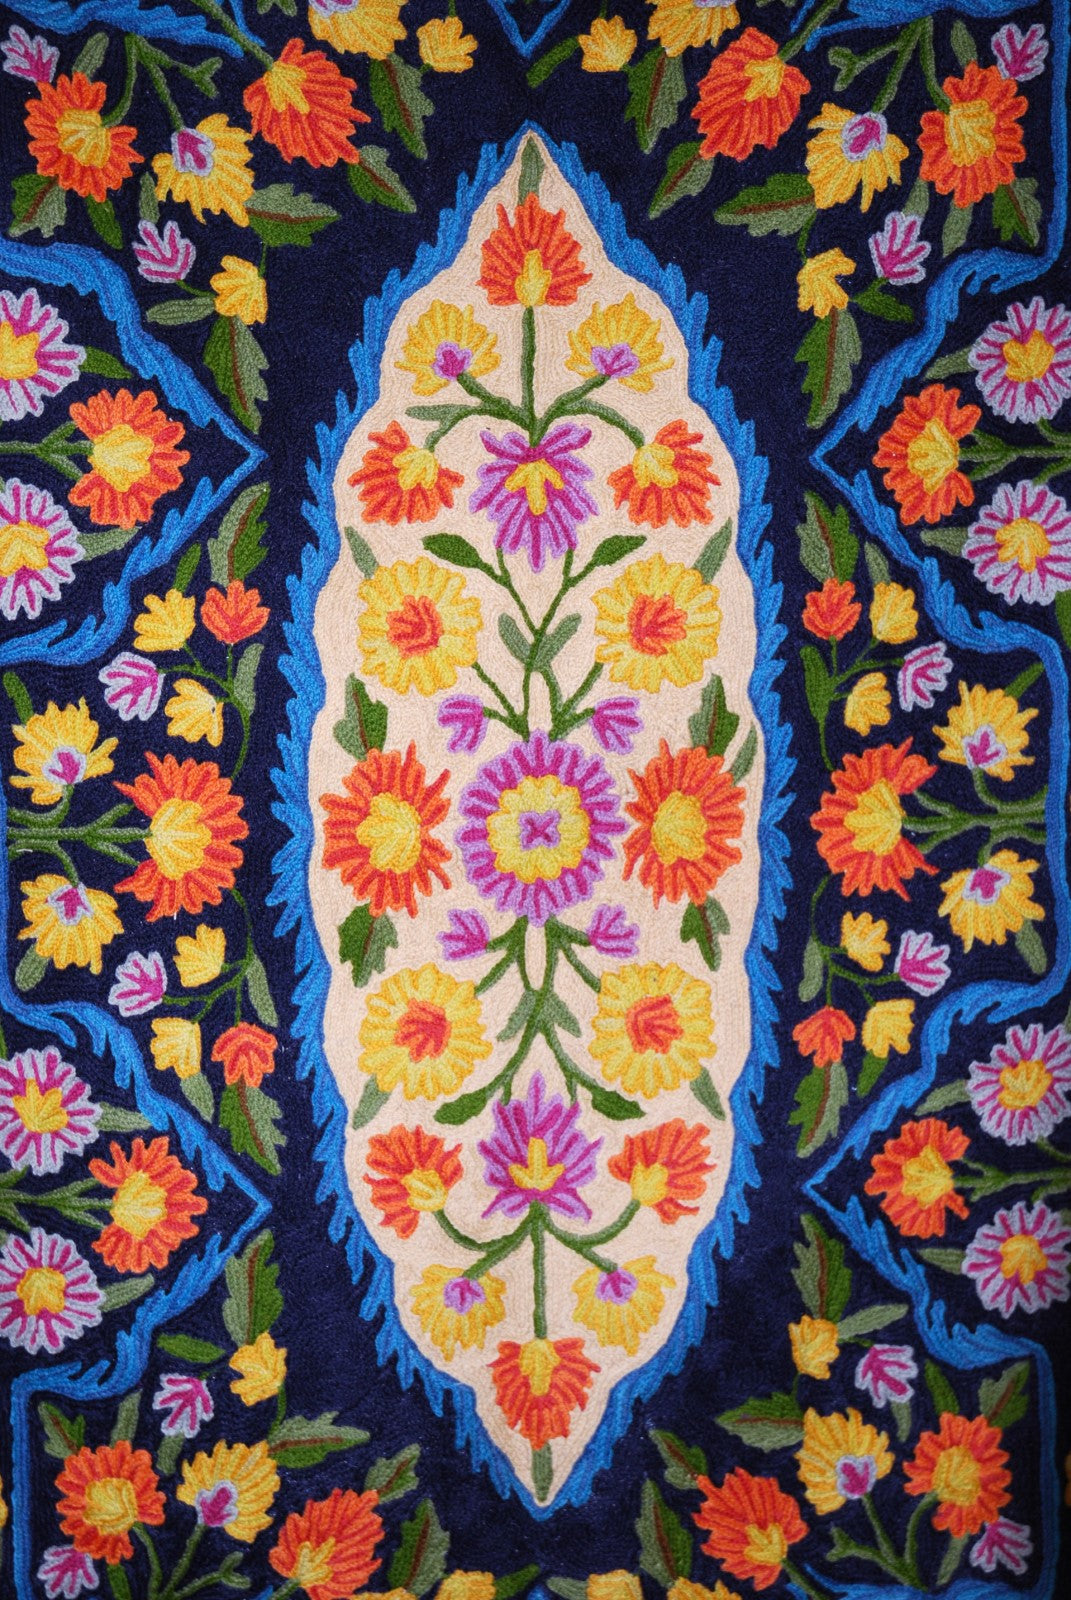 Handmade Tapestry Woolen Area Rug, Multicolor Embroidery 3x5 feet #CWR15133